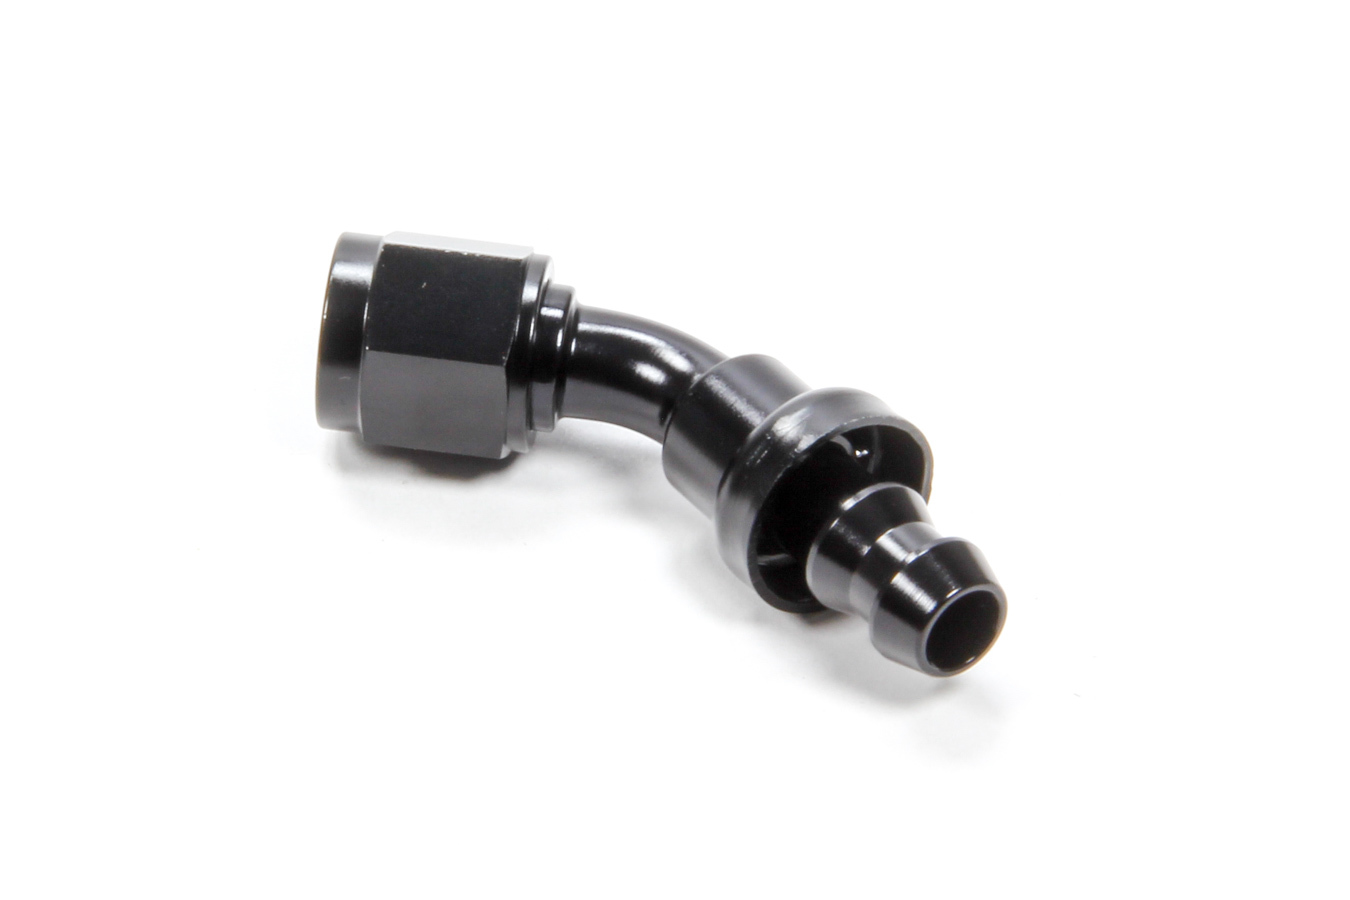 Triple X Race Components HF-14506-BLK Fitting, Hose End, 45 Degree, 6 AN Hose Barb to 6 AN Female, Aluminum, Black Anodized, Each